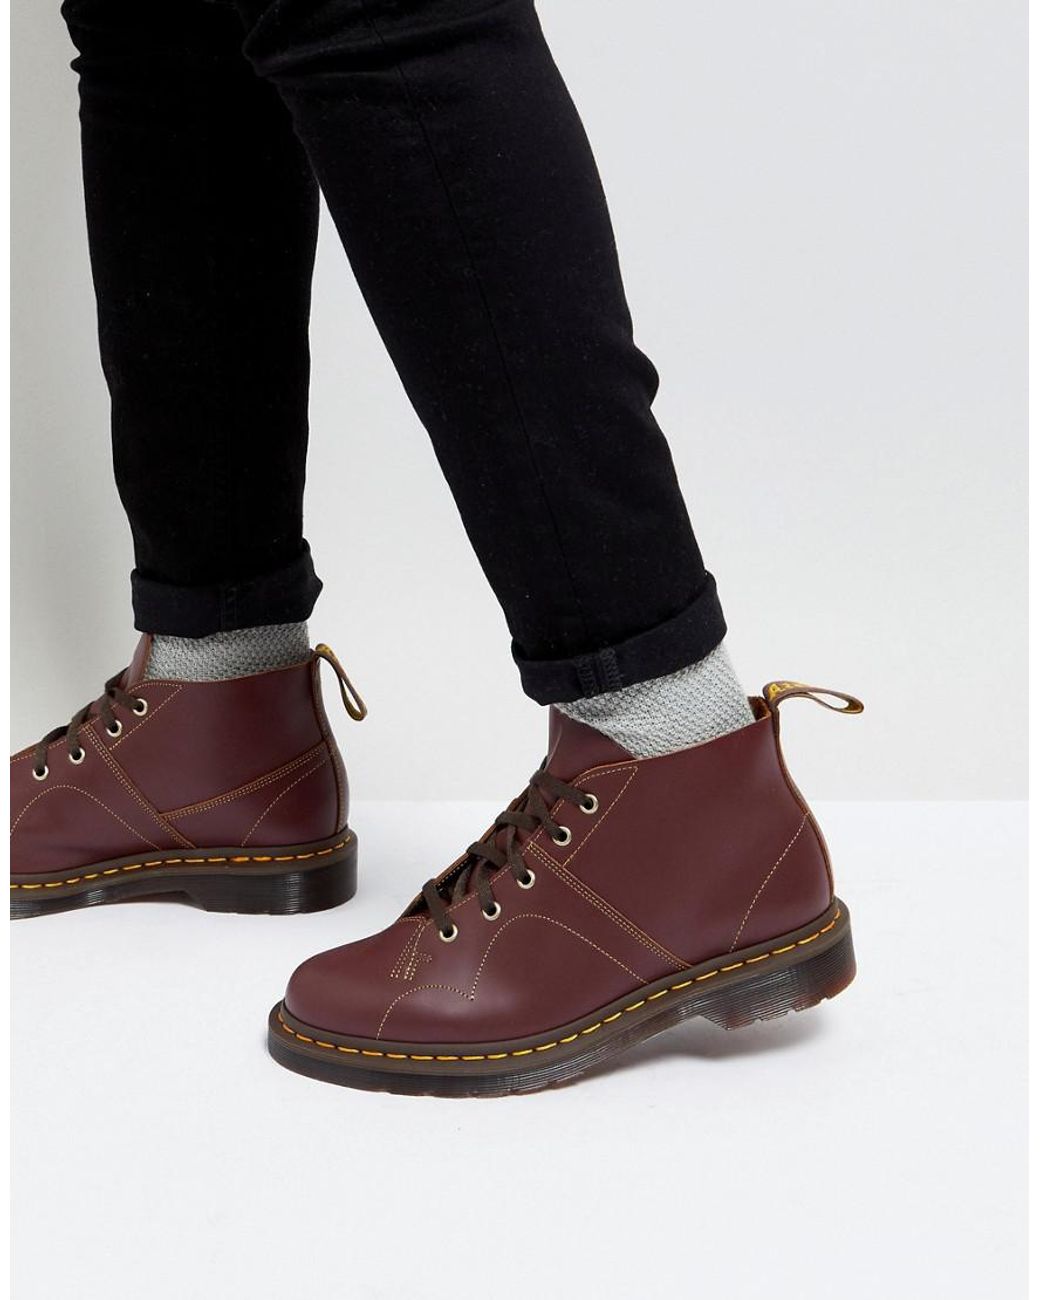 Dr. Martens Church Monkey Lace Up Boots In Oxblood in Red for Men